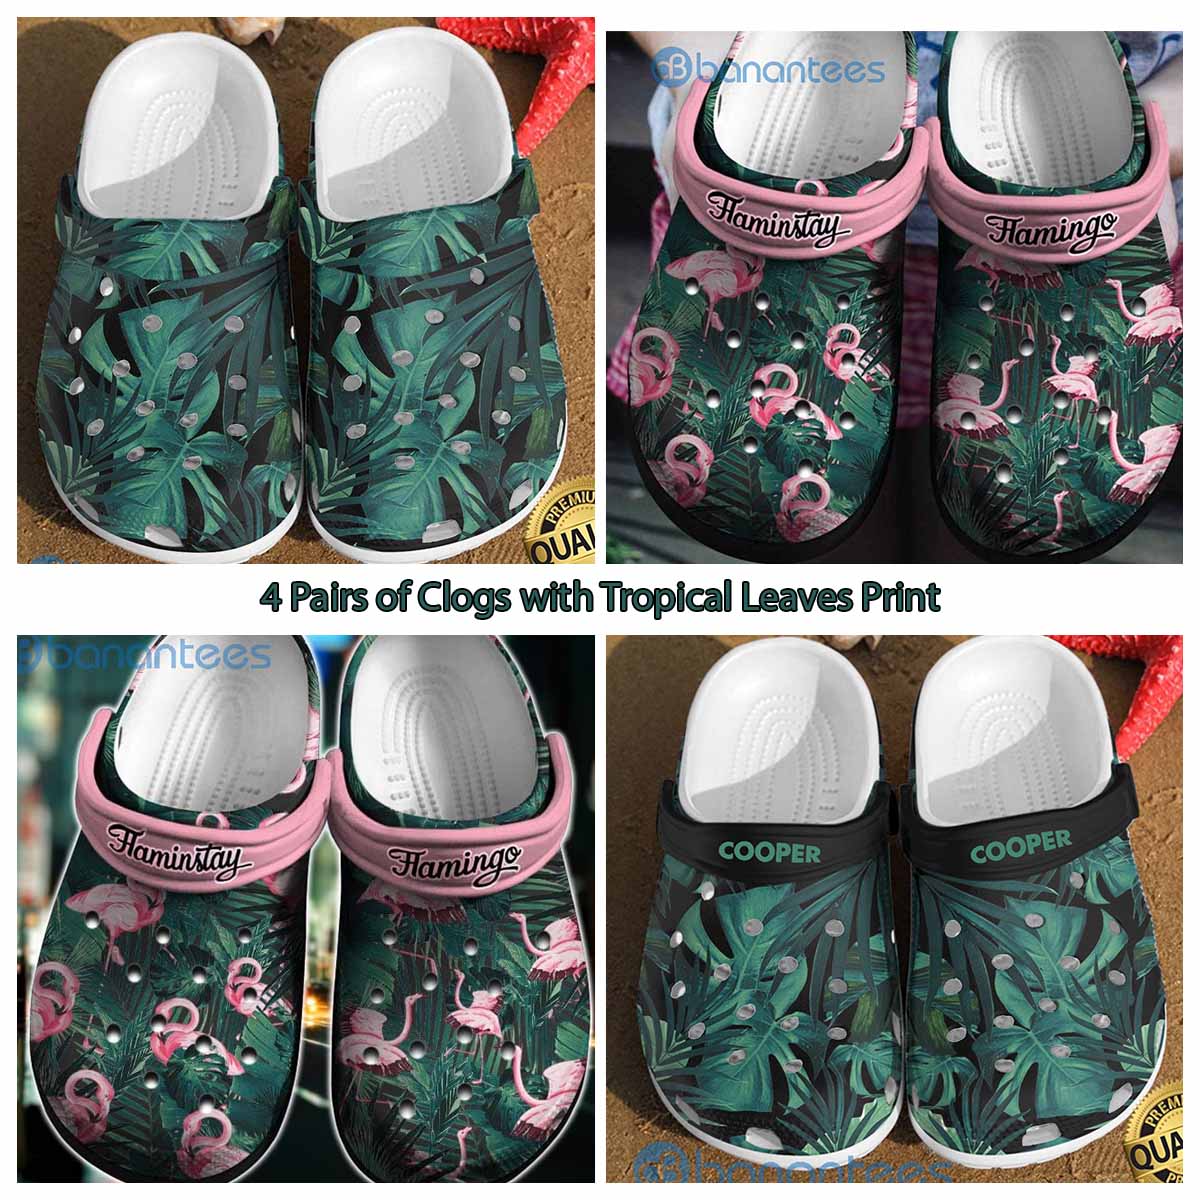 4 Pairs of Clogs with Tropical Leaves Print